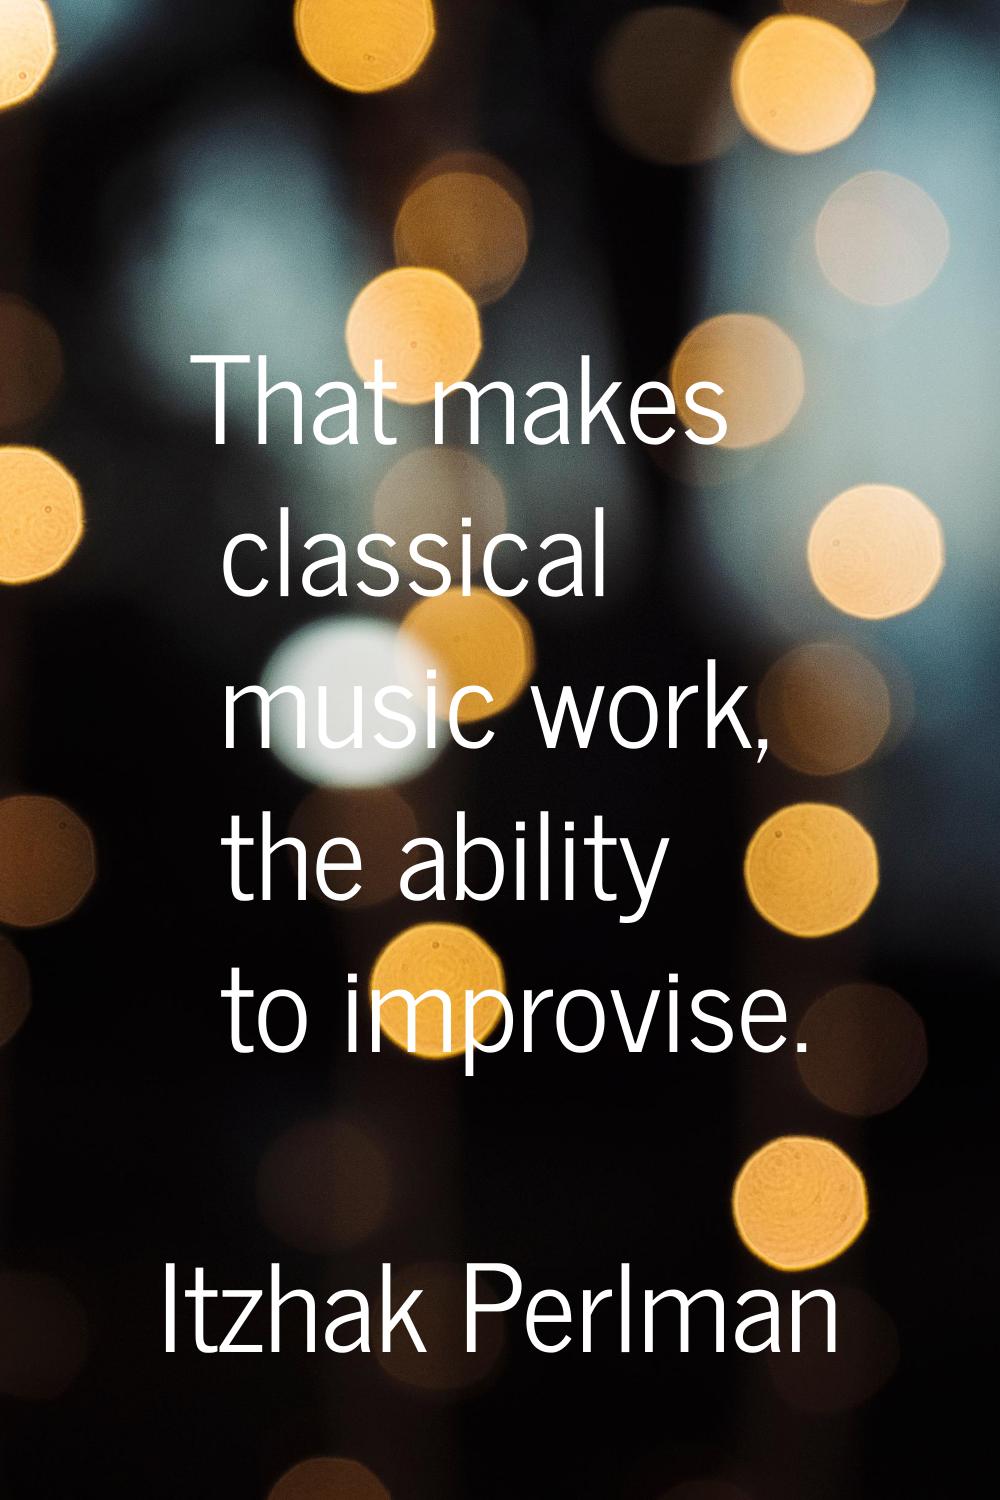 That makes classical music work, the ability to improvise.